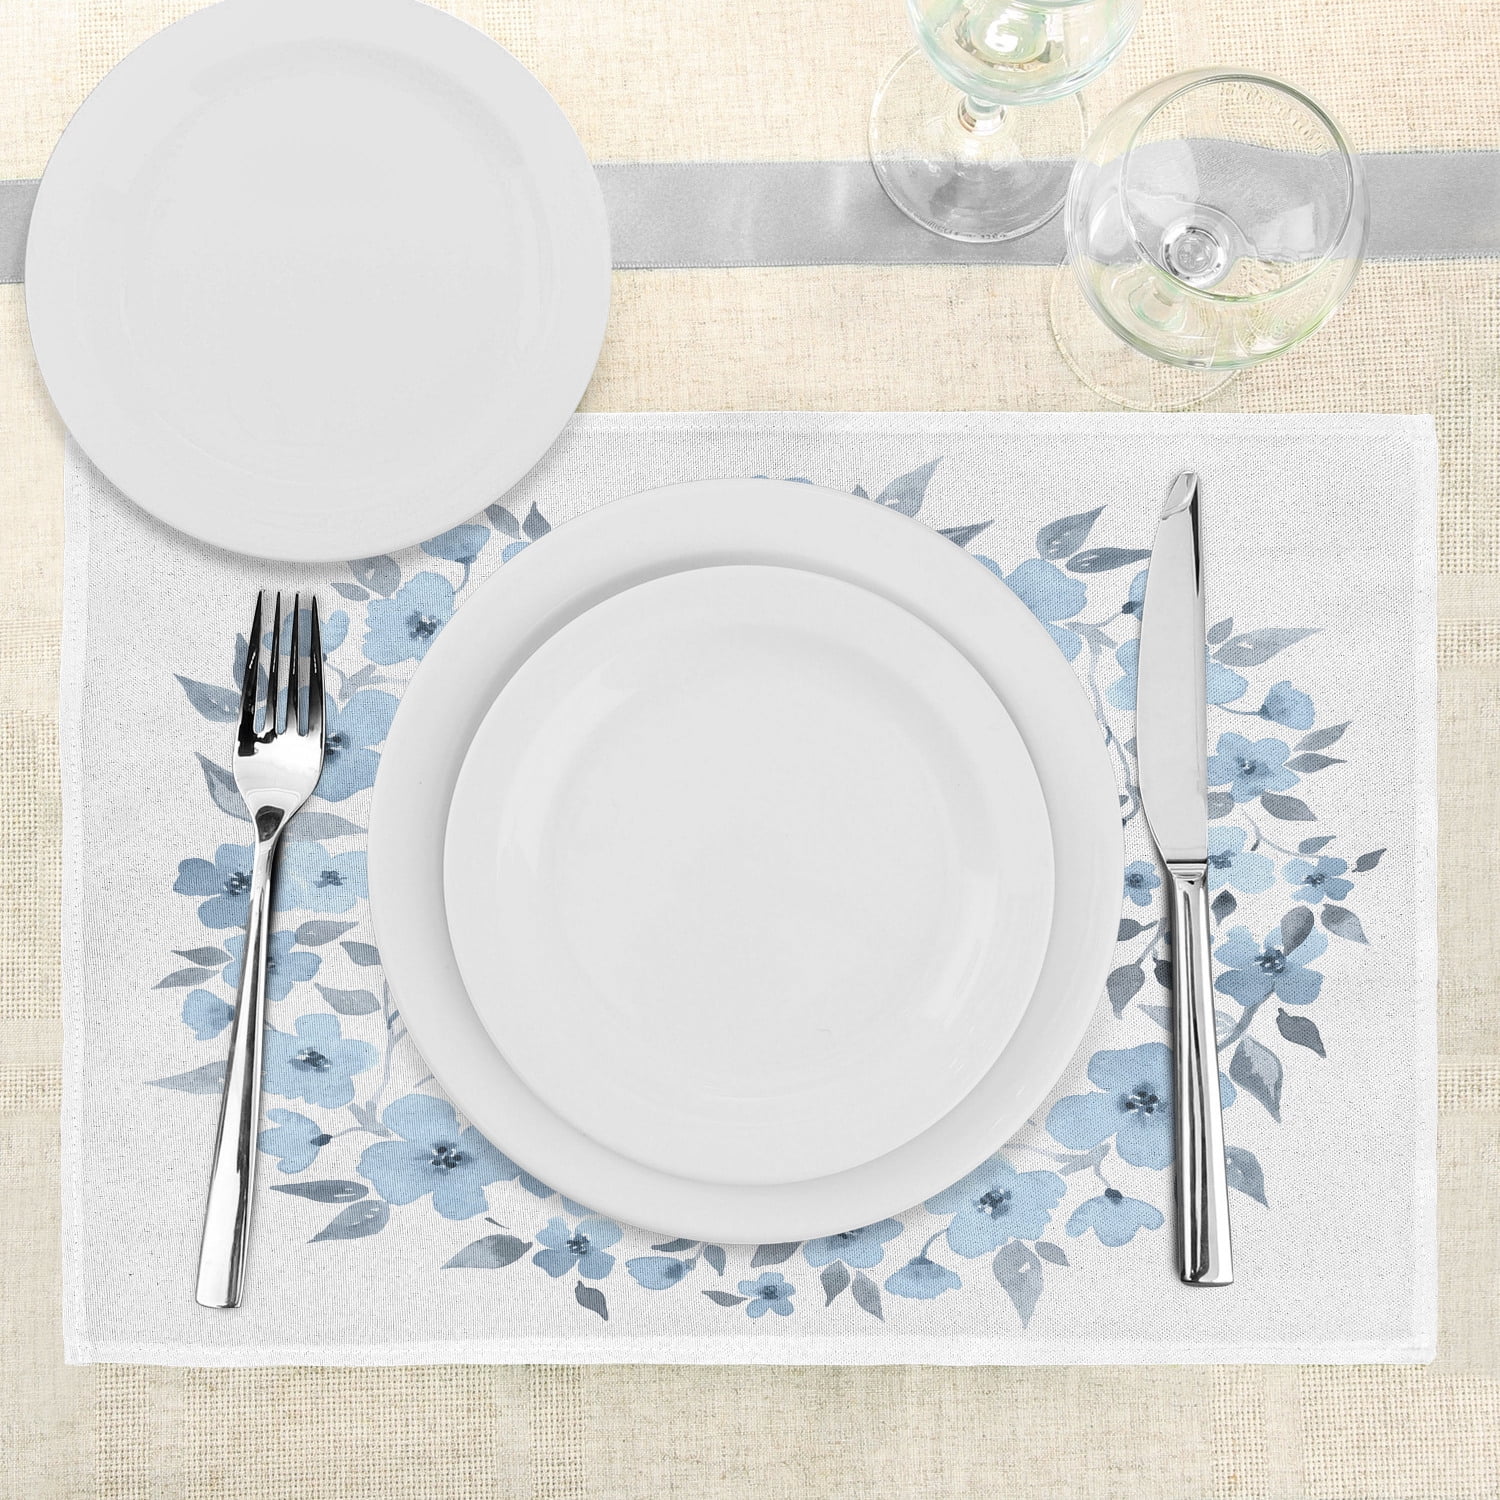 Ambesonne Watercolor Flower Place Mats Set of 4 Bunny Rabbit Portrait in Floral Wreath Illustration Country Style Blue Grey White Washable Fabric Placemats for Dining Room Kitchen Table Decor